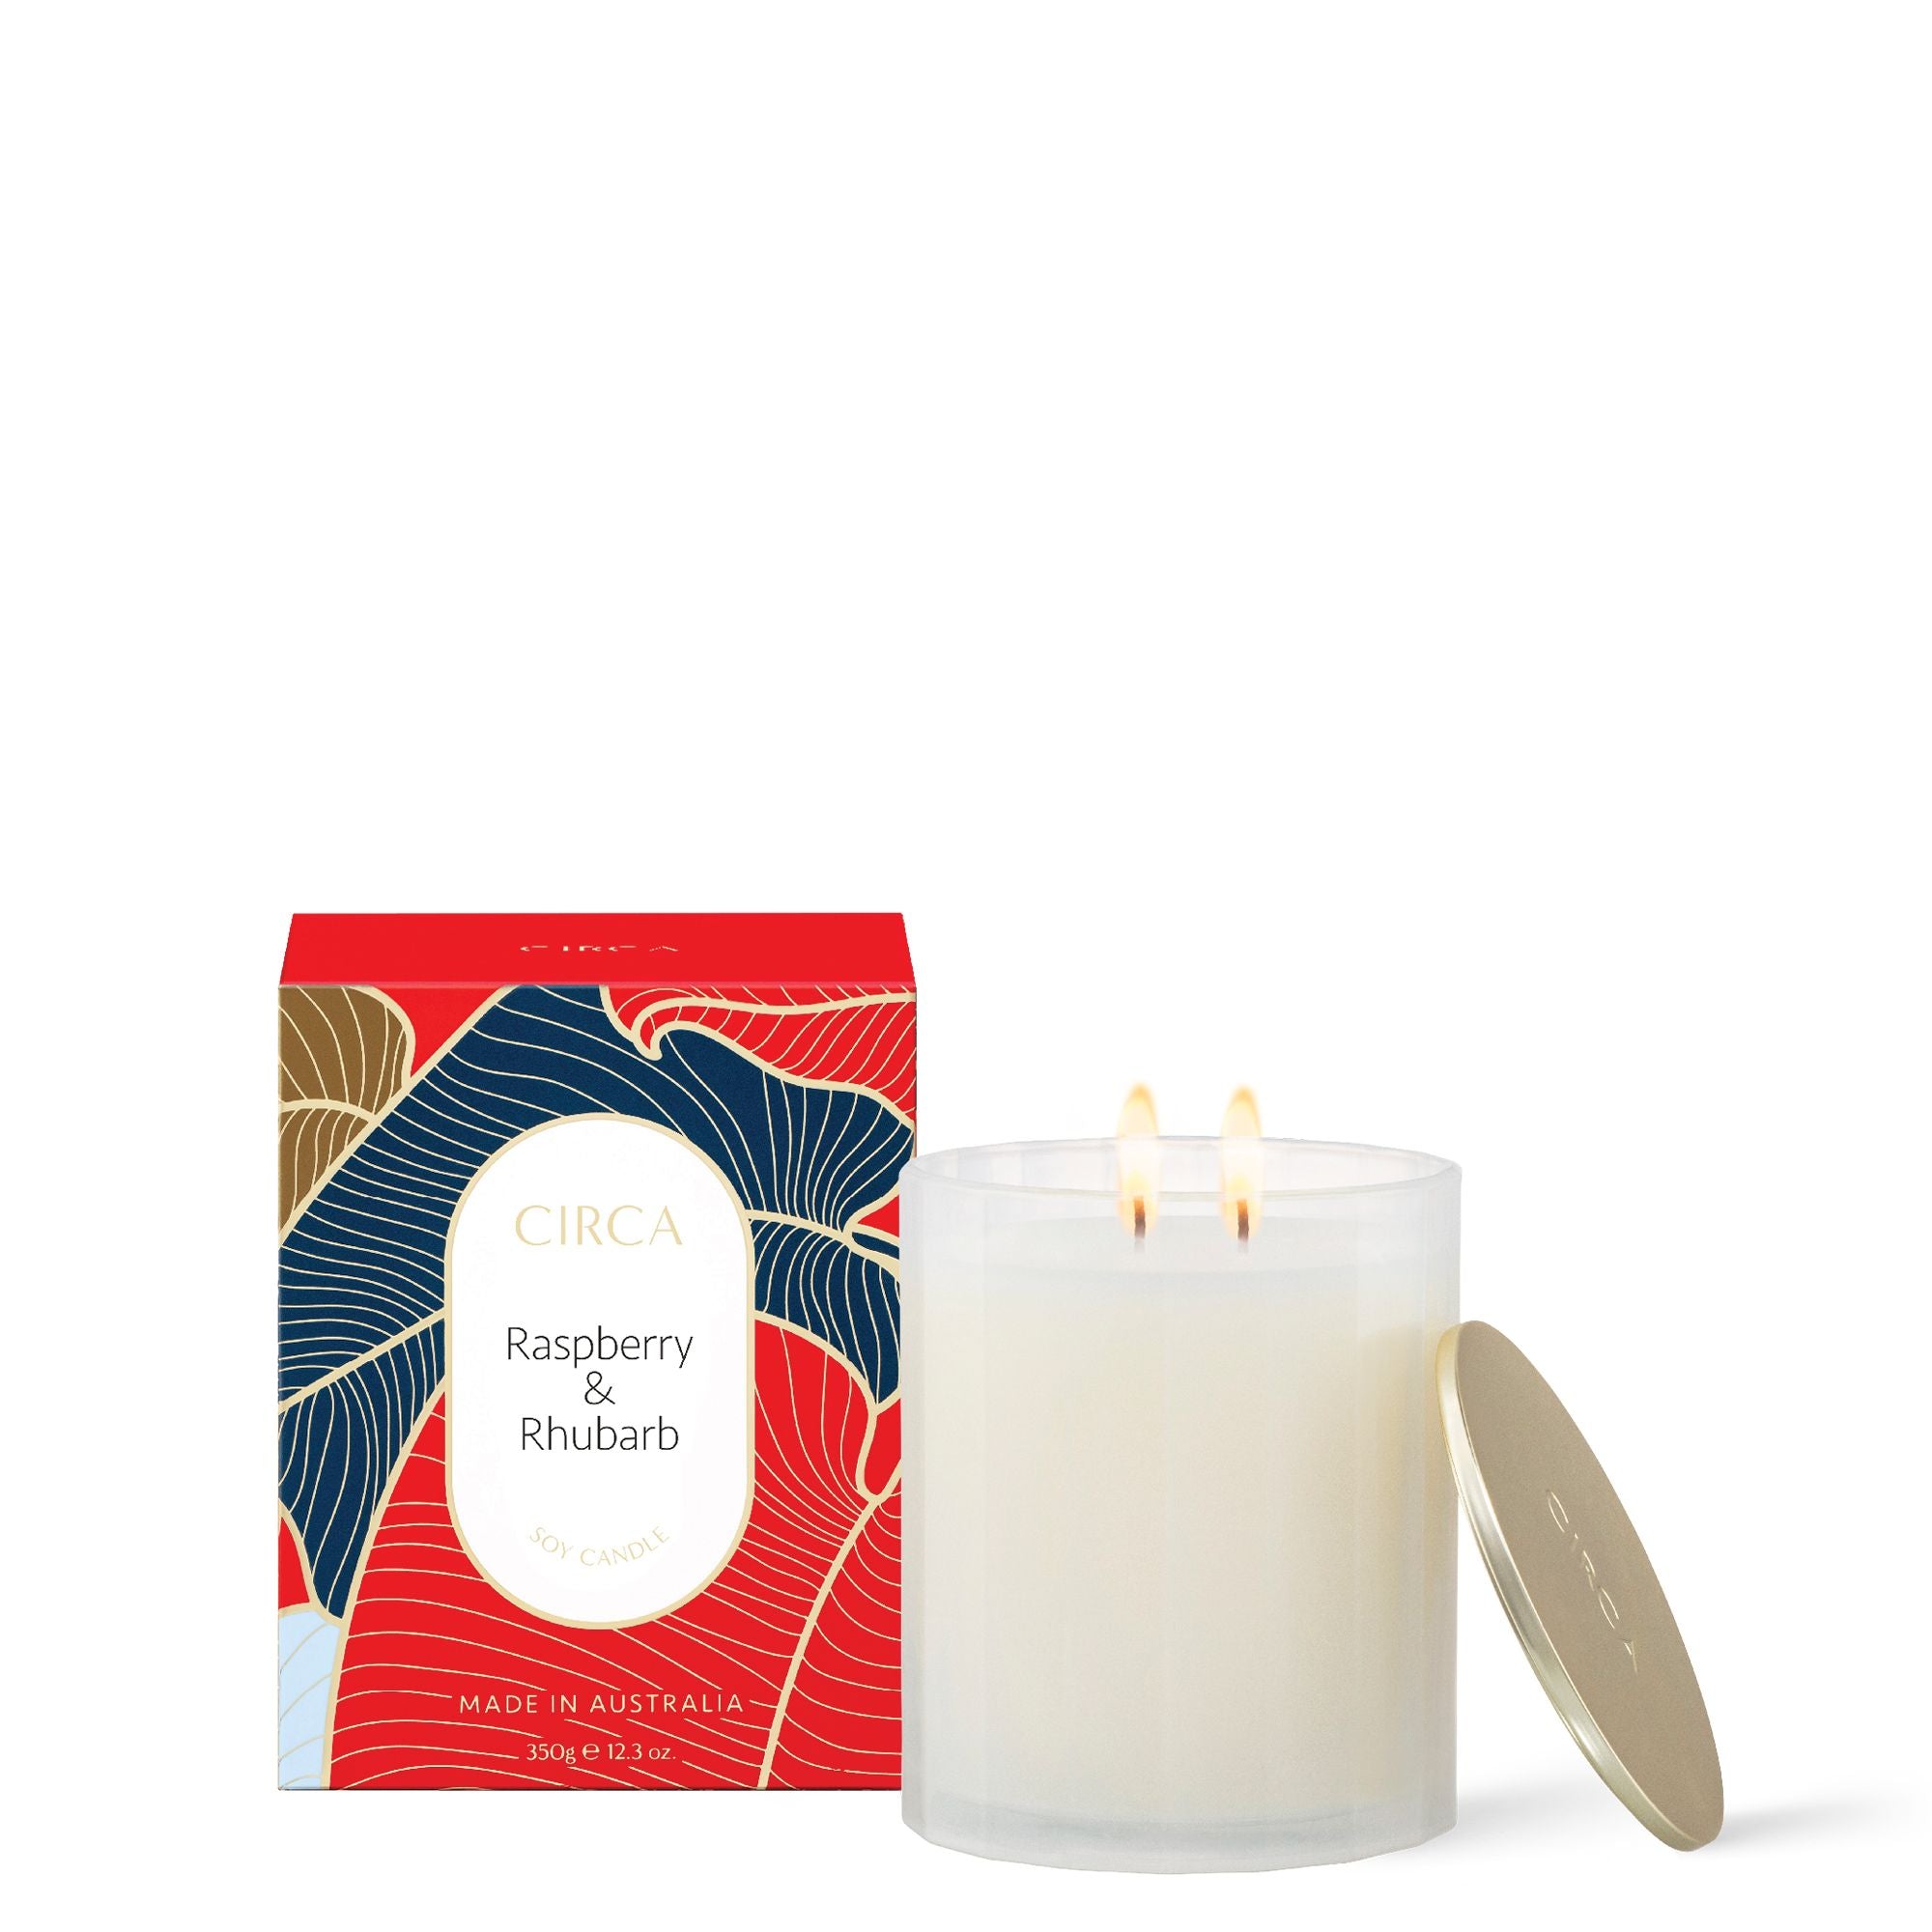 Rasberry & Rhubarb Scented Soy Candle 350g